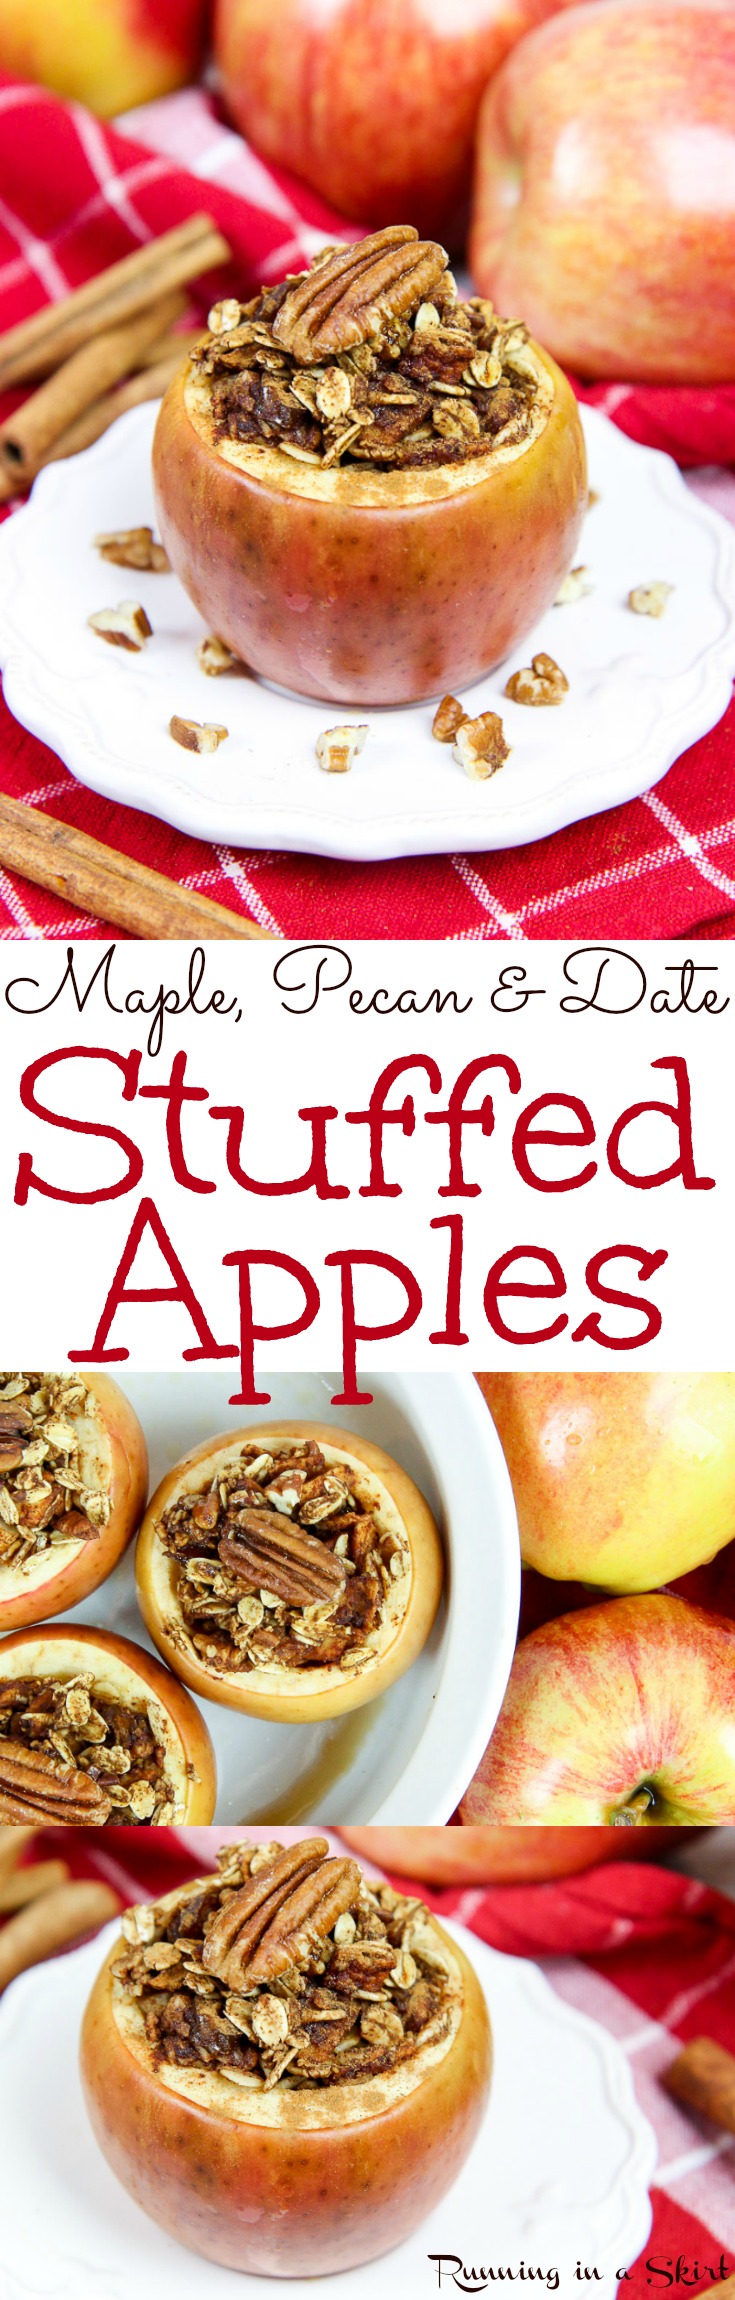 The Best Healthy Stuffed Apple recipe - Maple, Pecan and Date Stuffed Apples...baked to perfection! An easy dessert stuffed with oatmeal and cinnamon, Vegan, low carb, gluten free friendly and vegetarian. Tastes like an apple crisp without the crust! Perfect for fall treats. / Running in a Skirt via @juliewunder